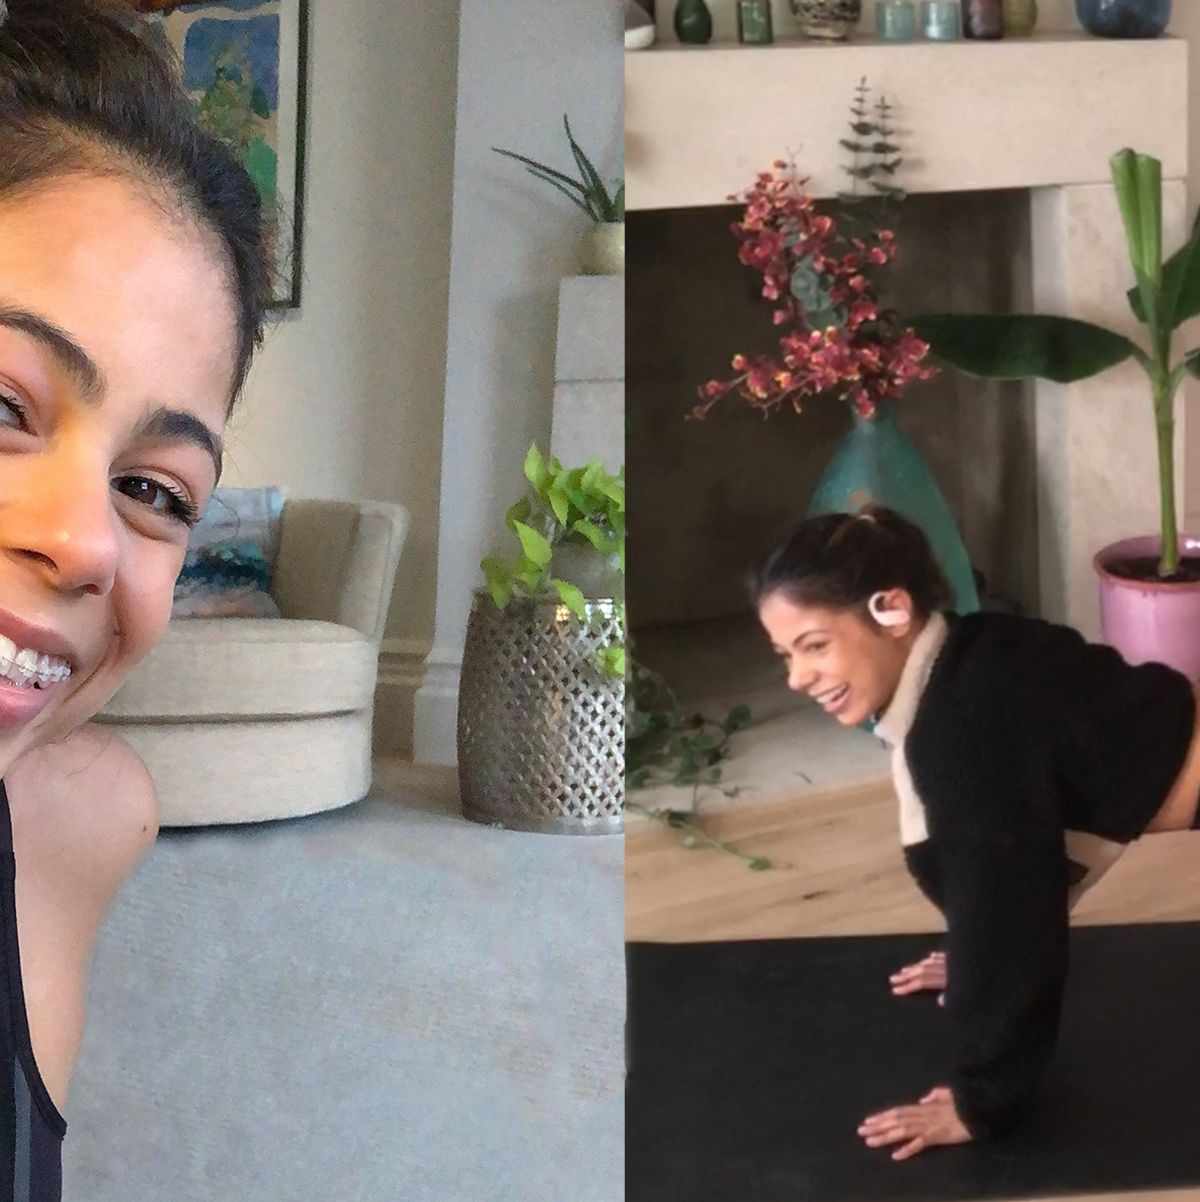 I did Pilates every day for 2 weeks, here's what happened